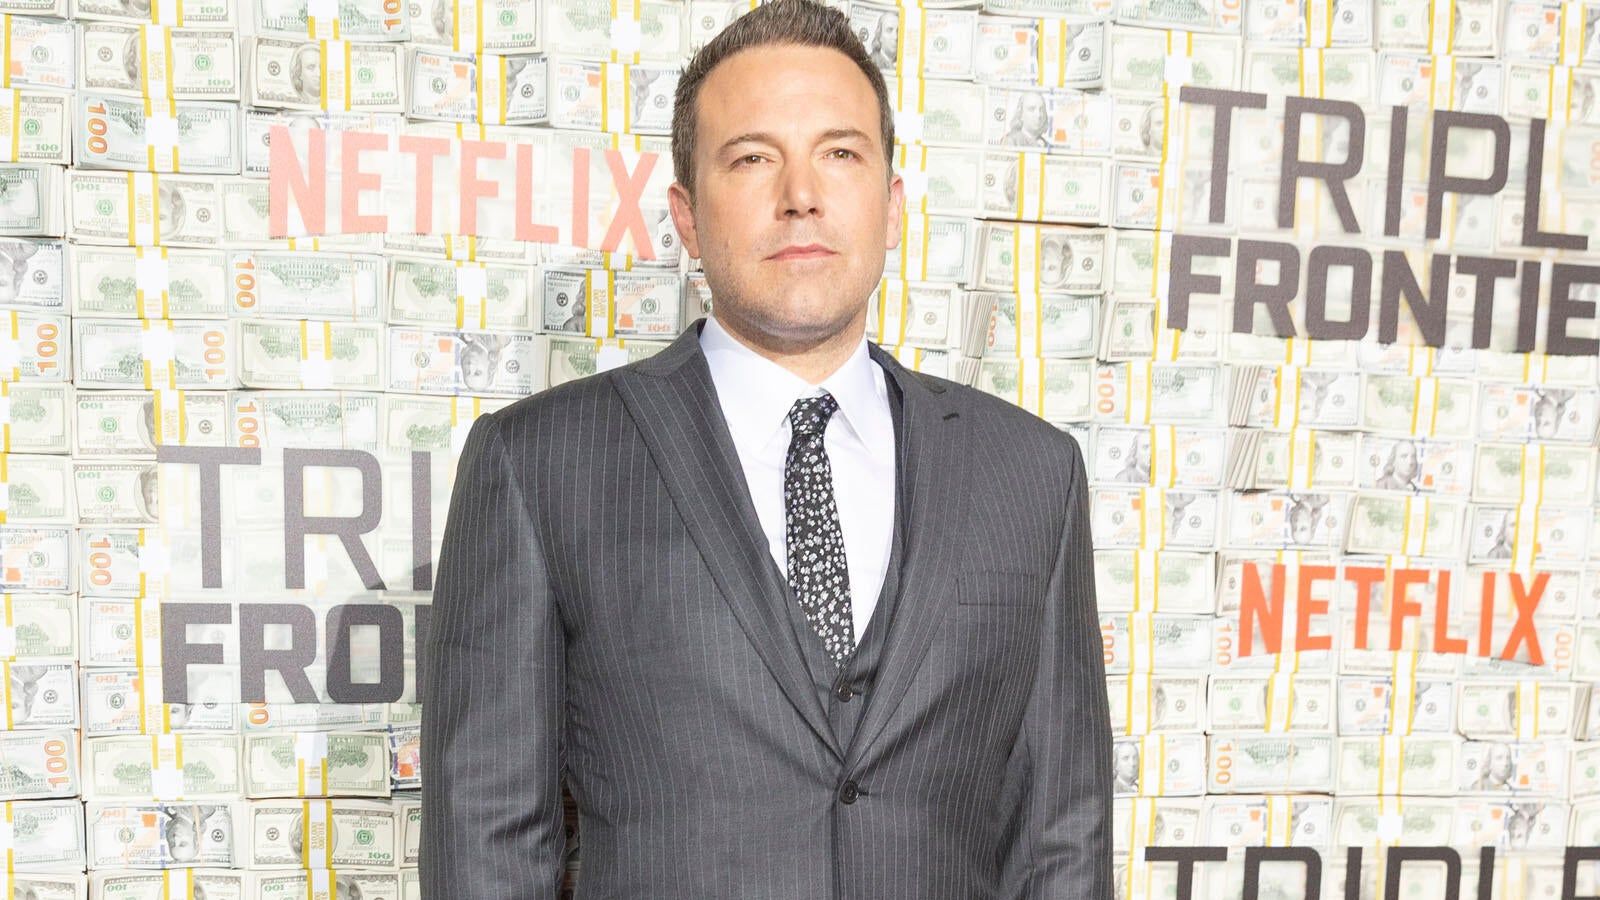 Ben Affleck's New Movie 'The Way Back' to be Released in March